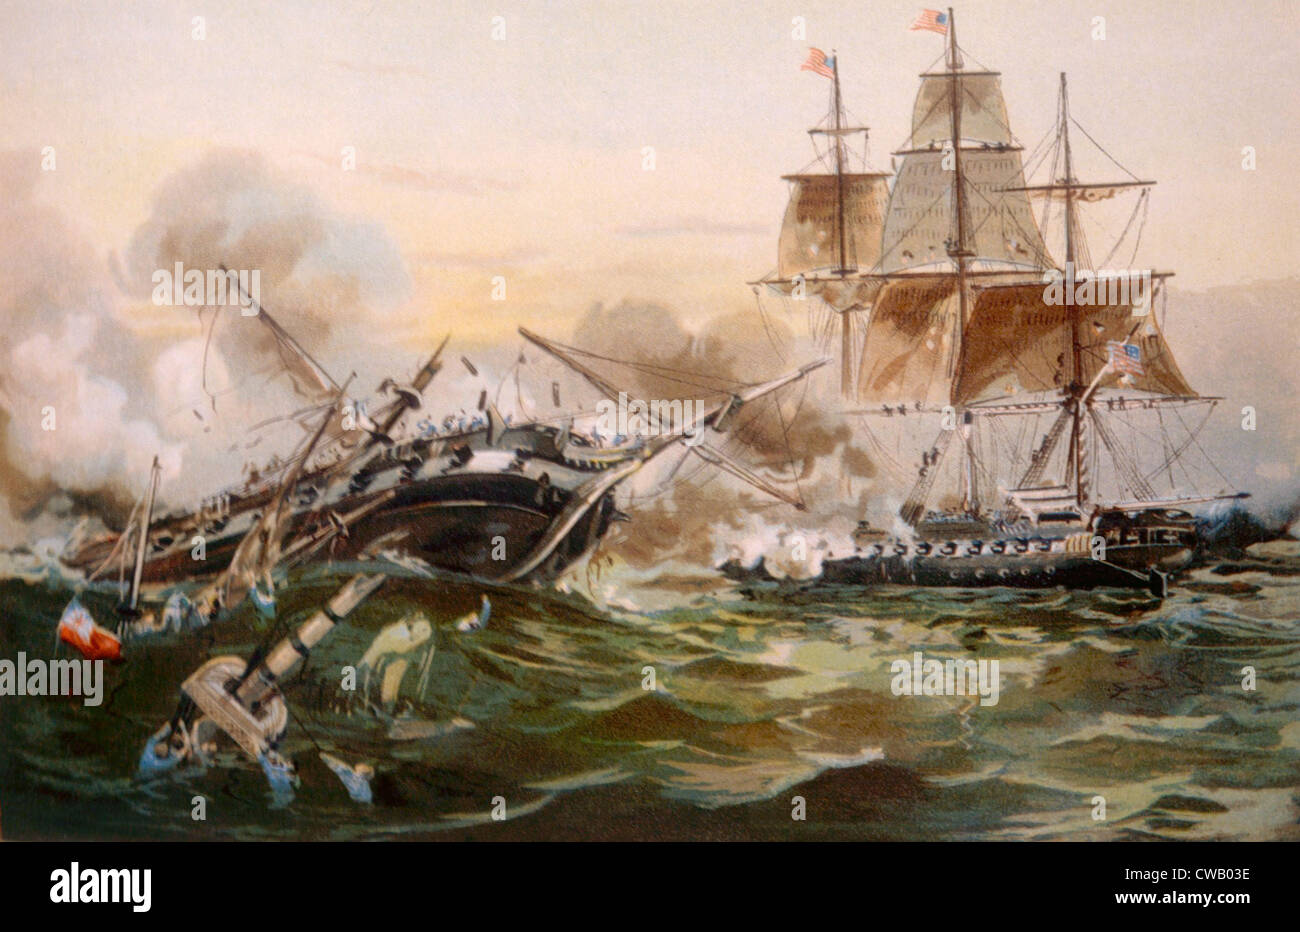 The War of 1812, naval battle between the U.S. frigate Constitution and the British warship Guerriere, 1812 Stock Photo